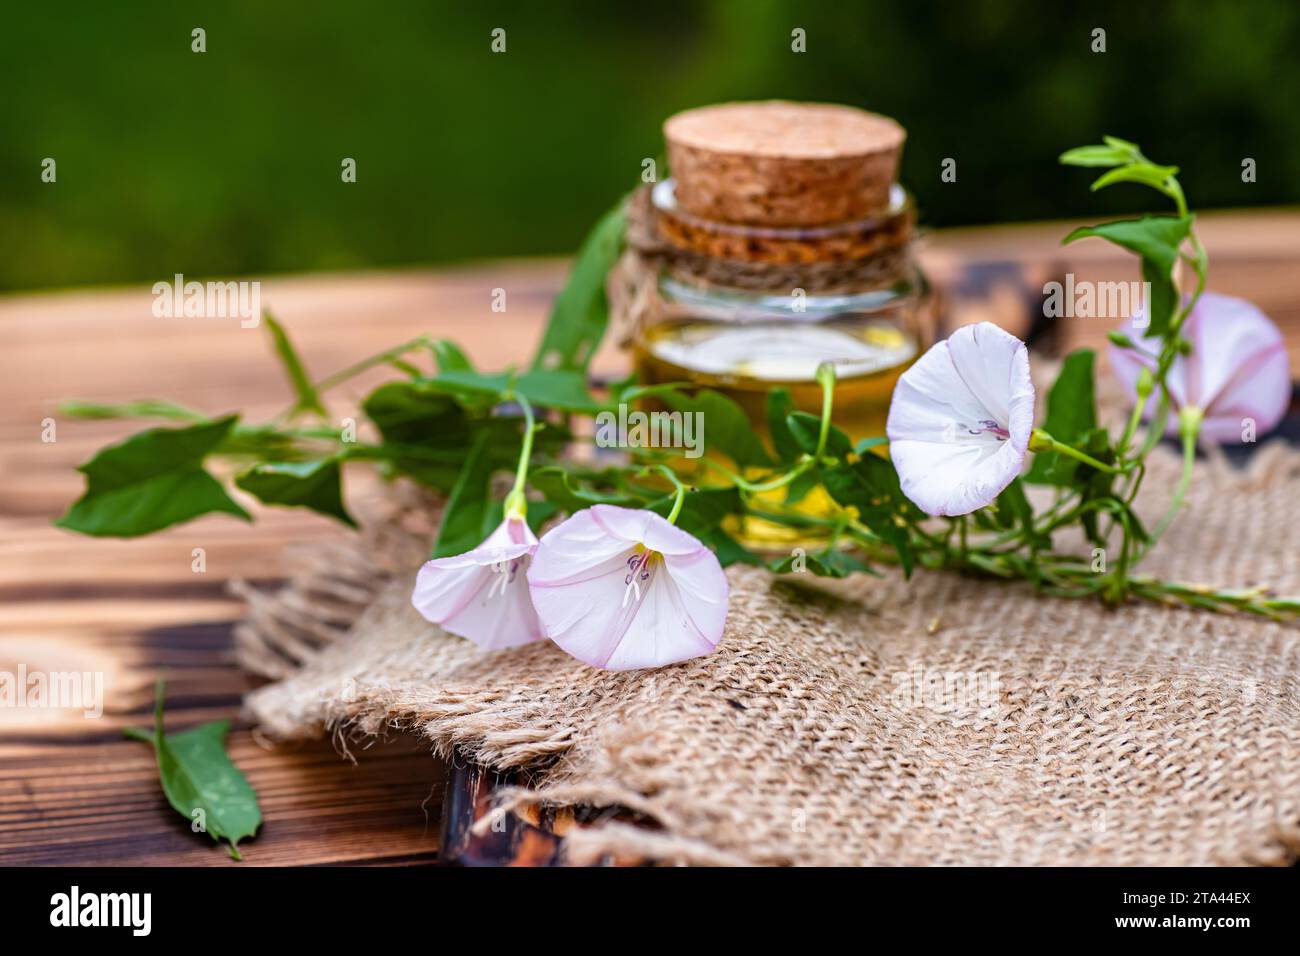 Convolvulus arvensis, or field bindweed making an elixir or tincture with essential oil from flowers. Fresh flowers collected during the flowering per Stock Photo